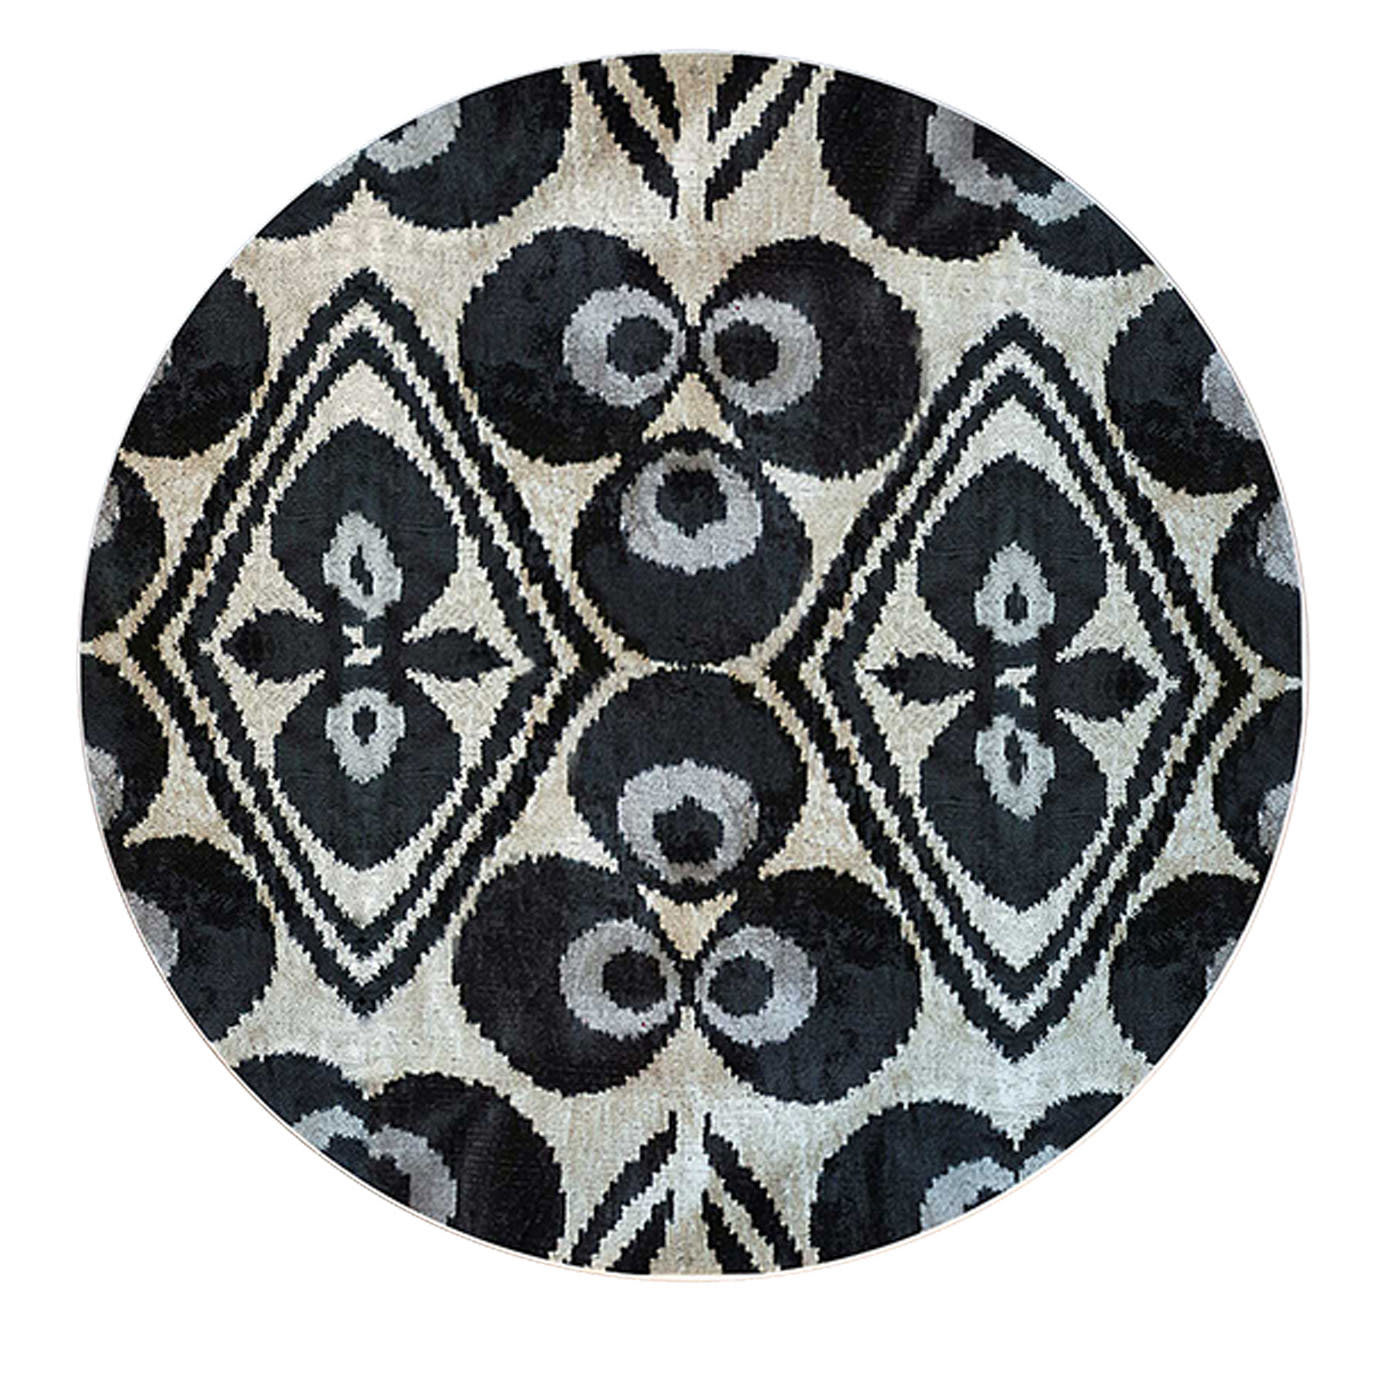 Set of 6 Ikat Porcelain Plates in Black and White - Les Ottomans